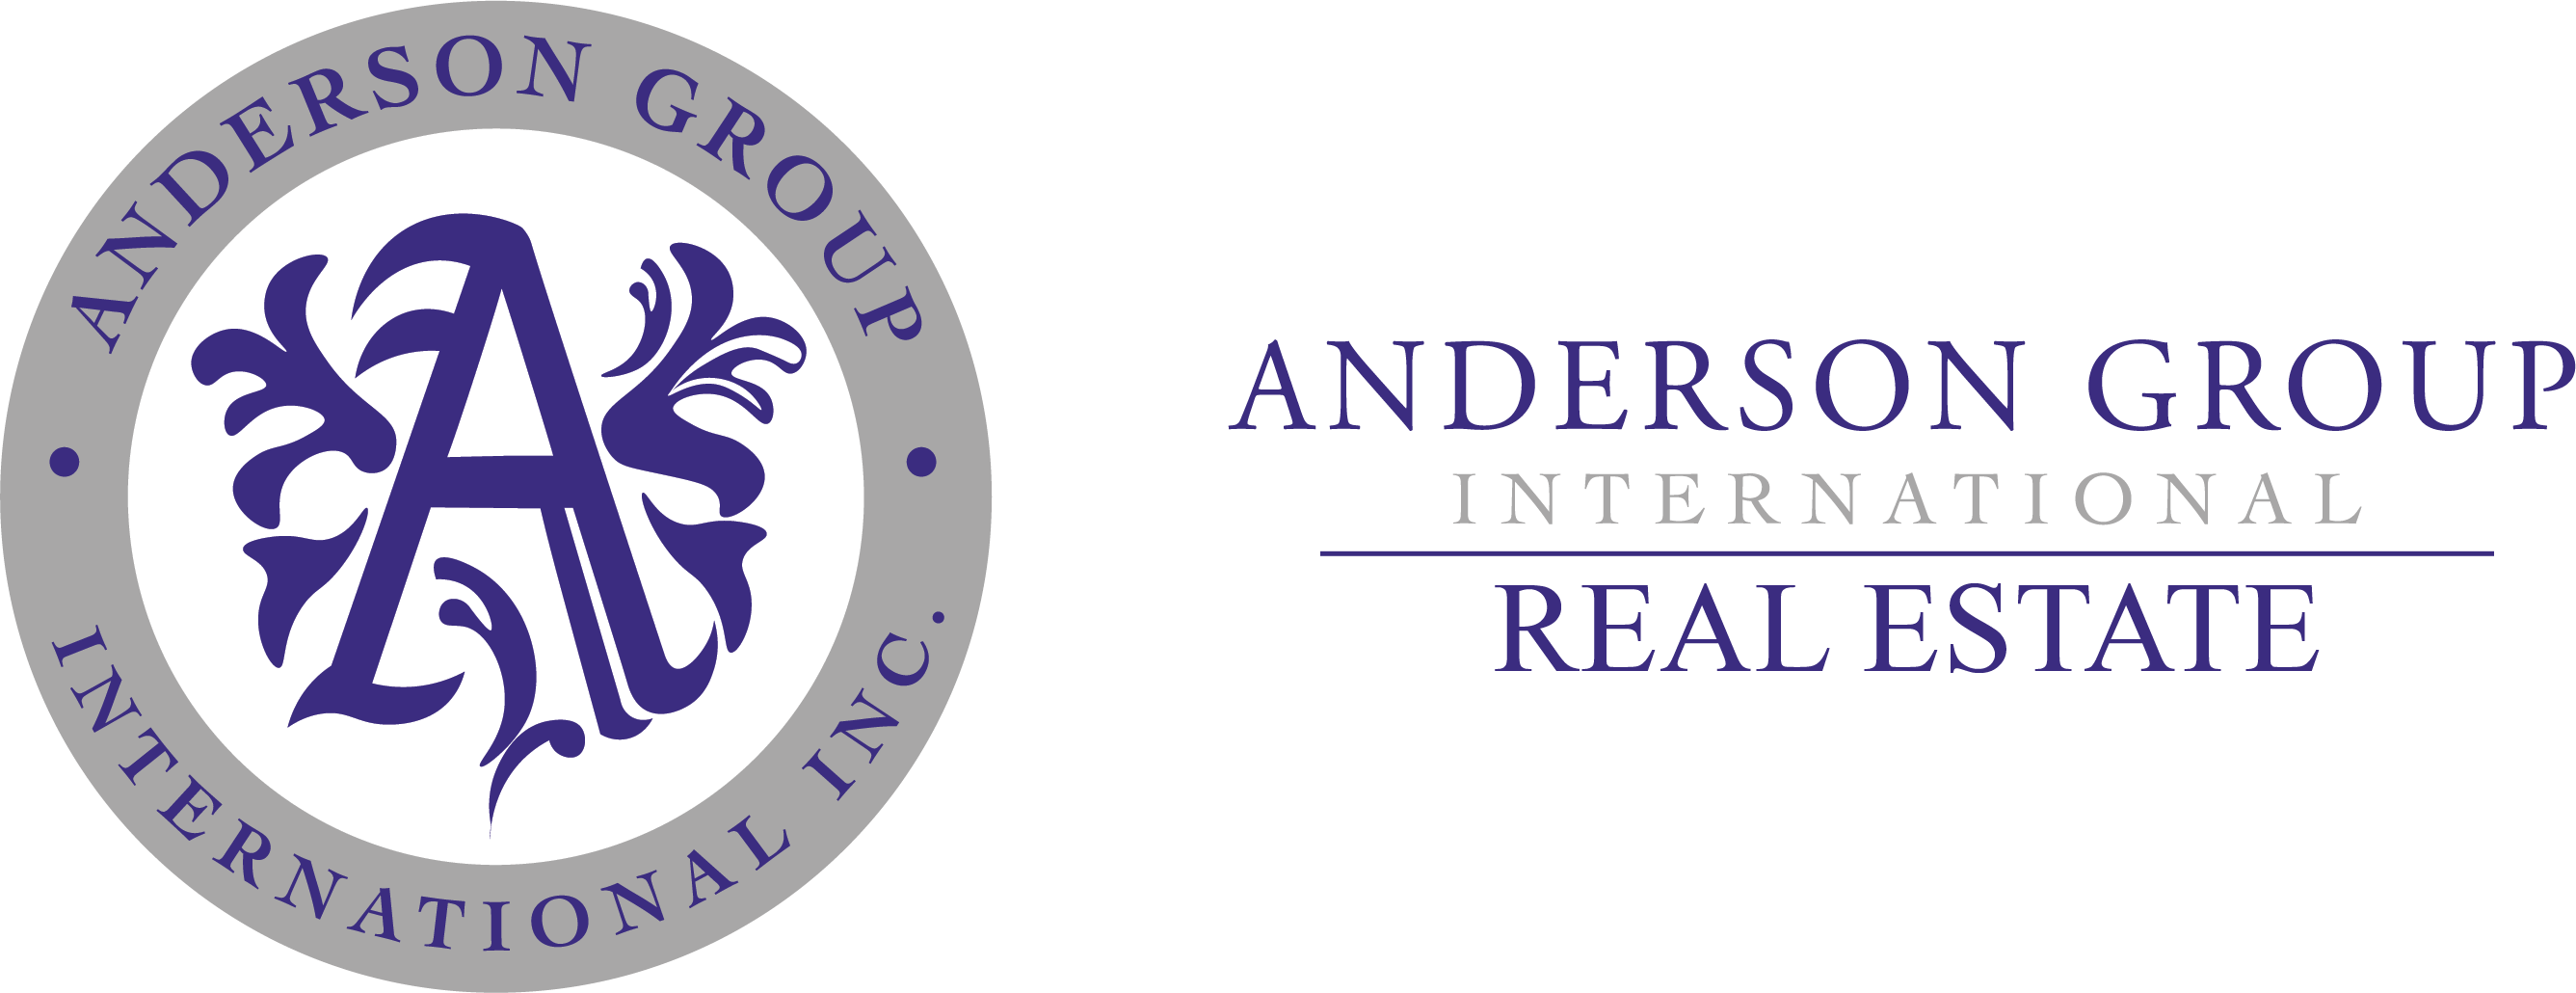 Anderson Group International - Real Estate